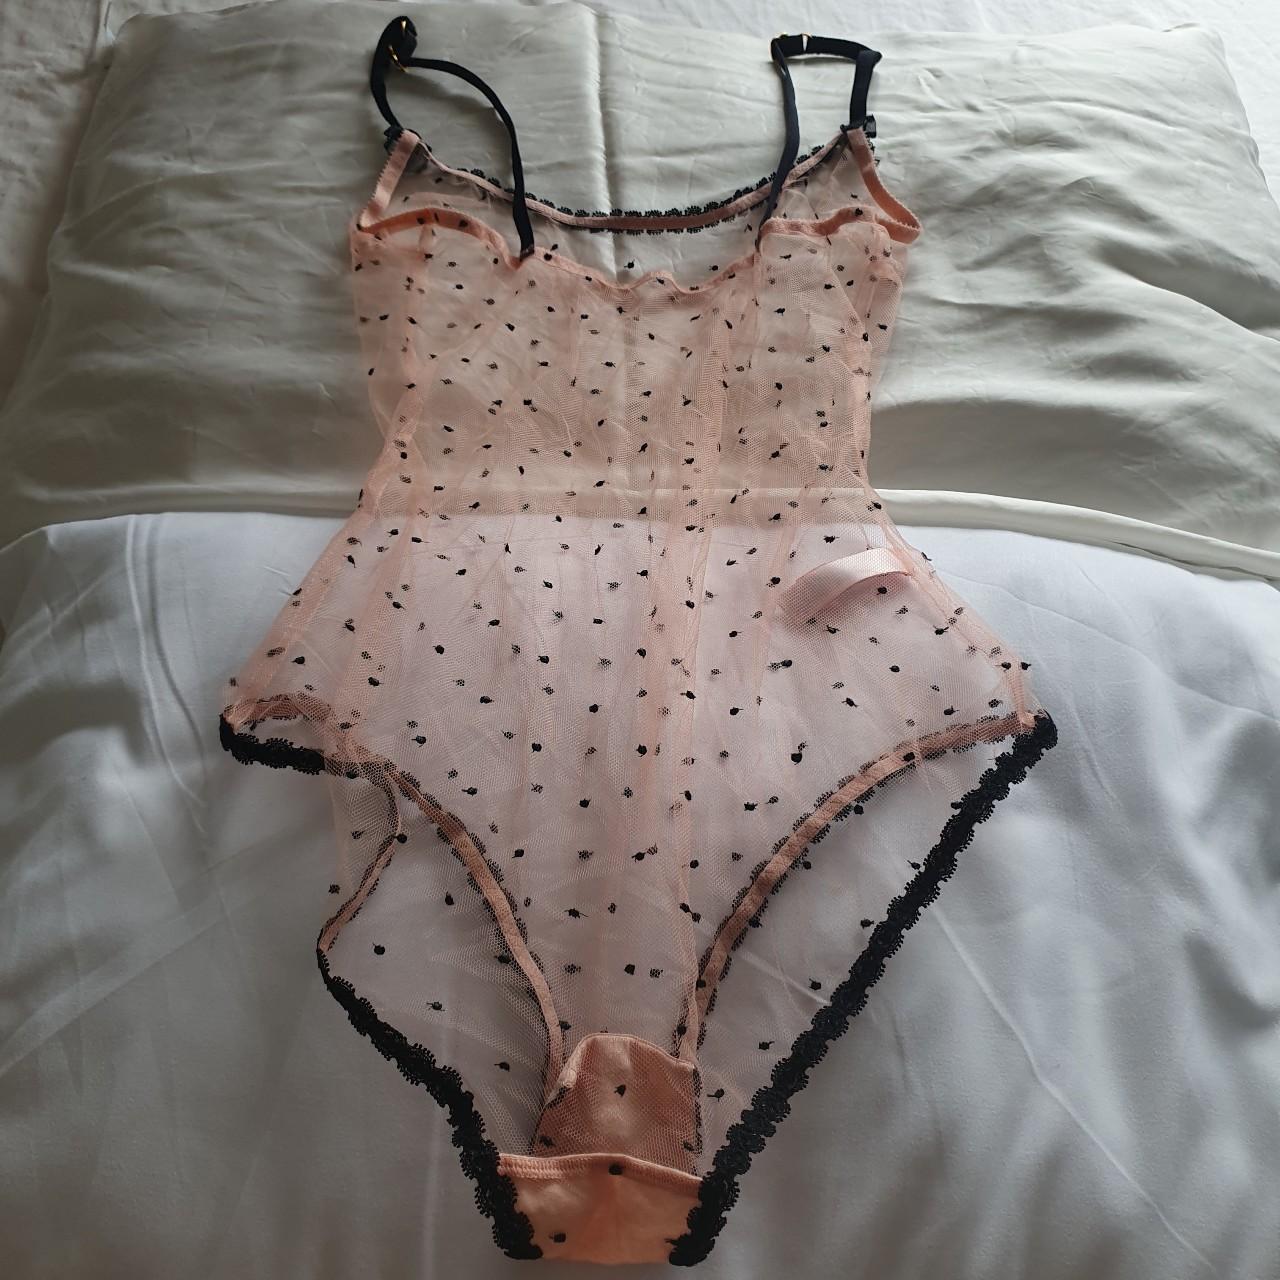 Agent provocateur body suit. Only worn to try on as... - Depop